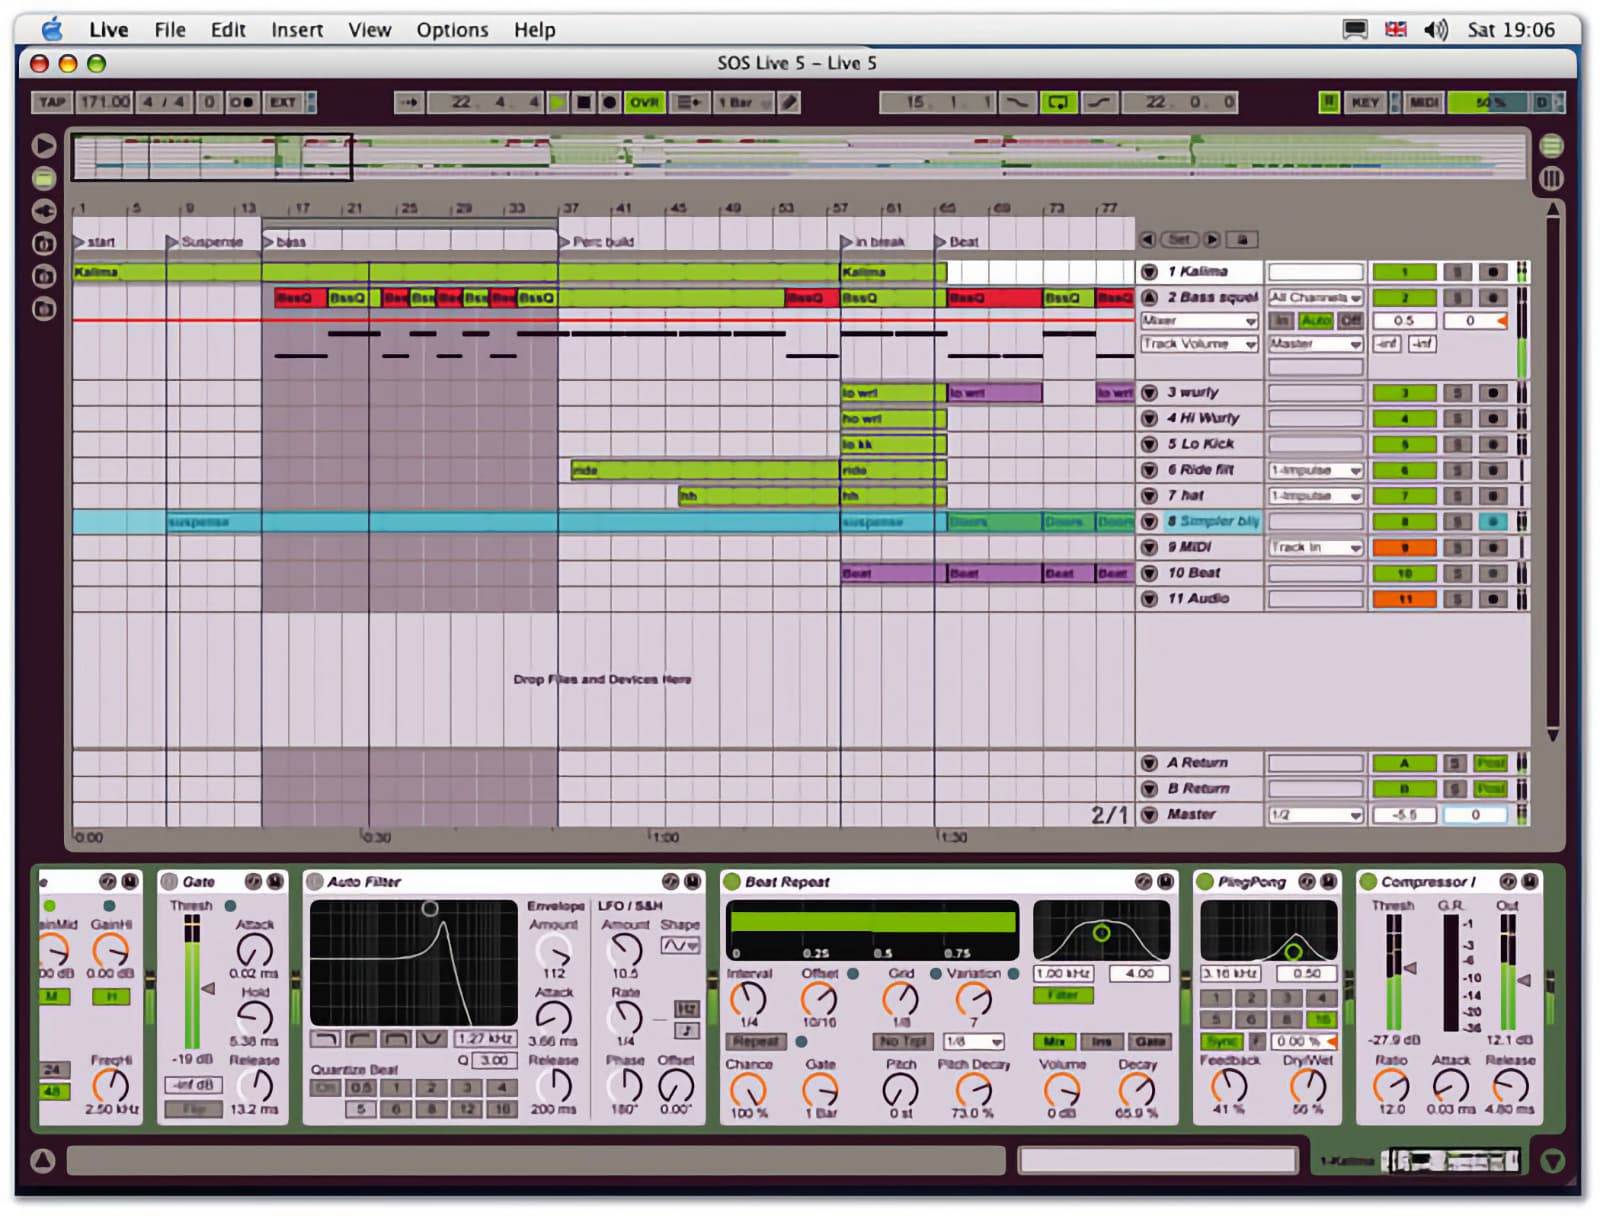 Ableton Live 5 will support MP3s